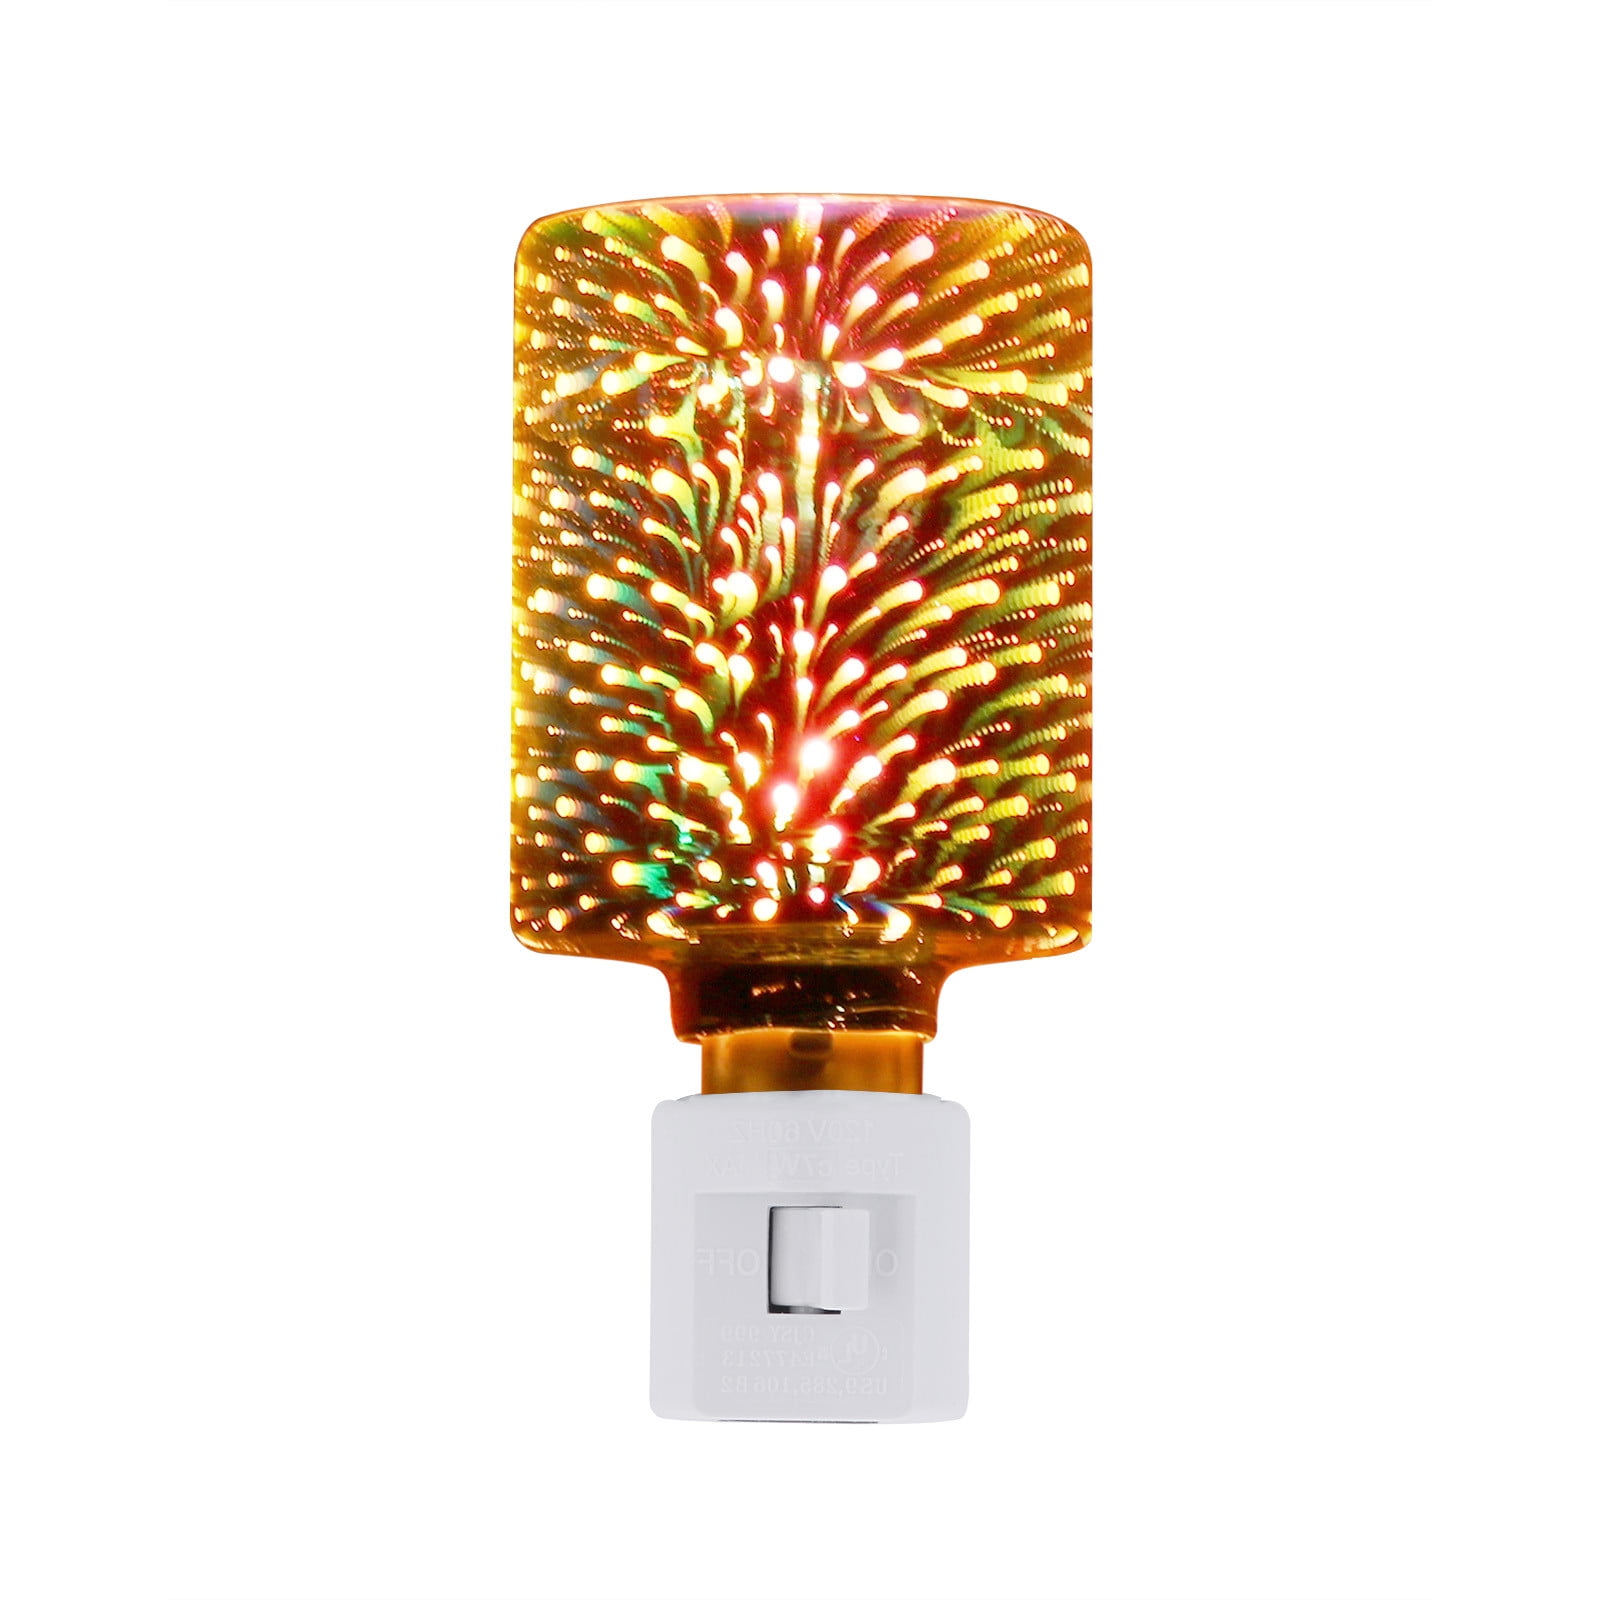 Marbled Wax Warmer Plug In Electric Night Light You Choose Color 360 Degree Plug 